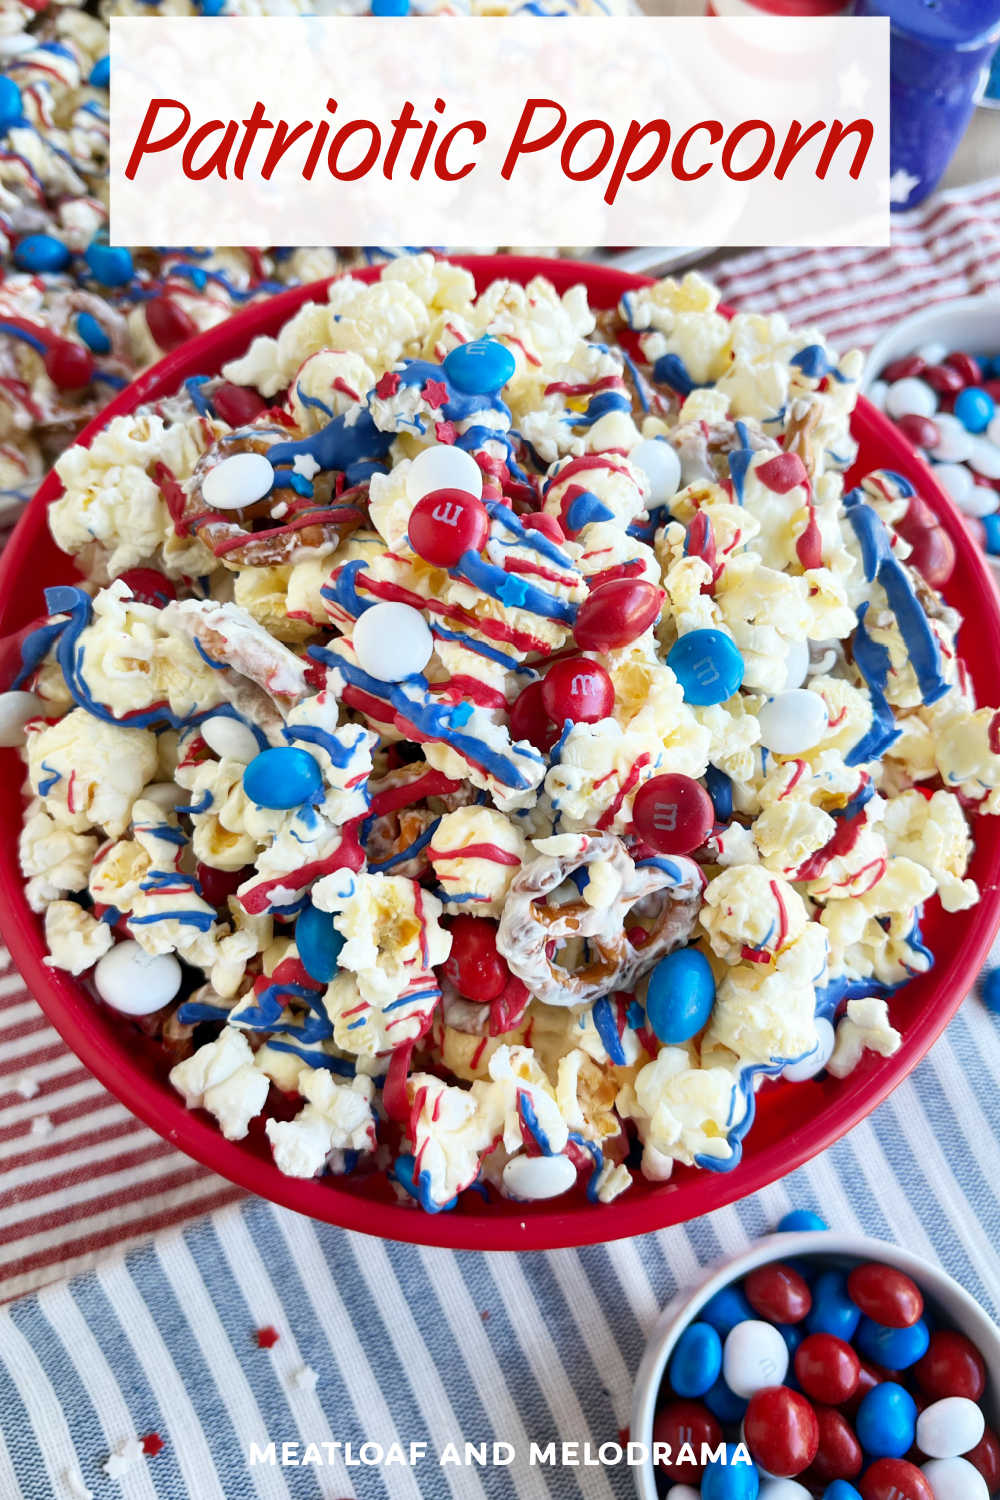 Patriotic Popcorn with white chocolate, pretzels and colorful candy in an easy red white and blue dessert perfect for Fourth of July and other patriotic holidays. Everyone loves this salty and sweet treat! via @meamel